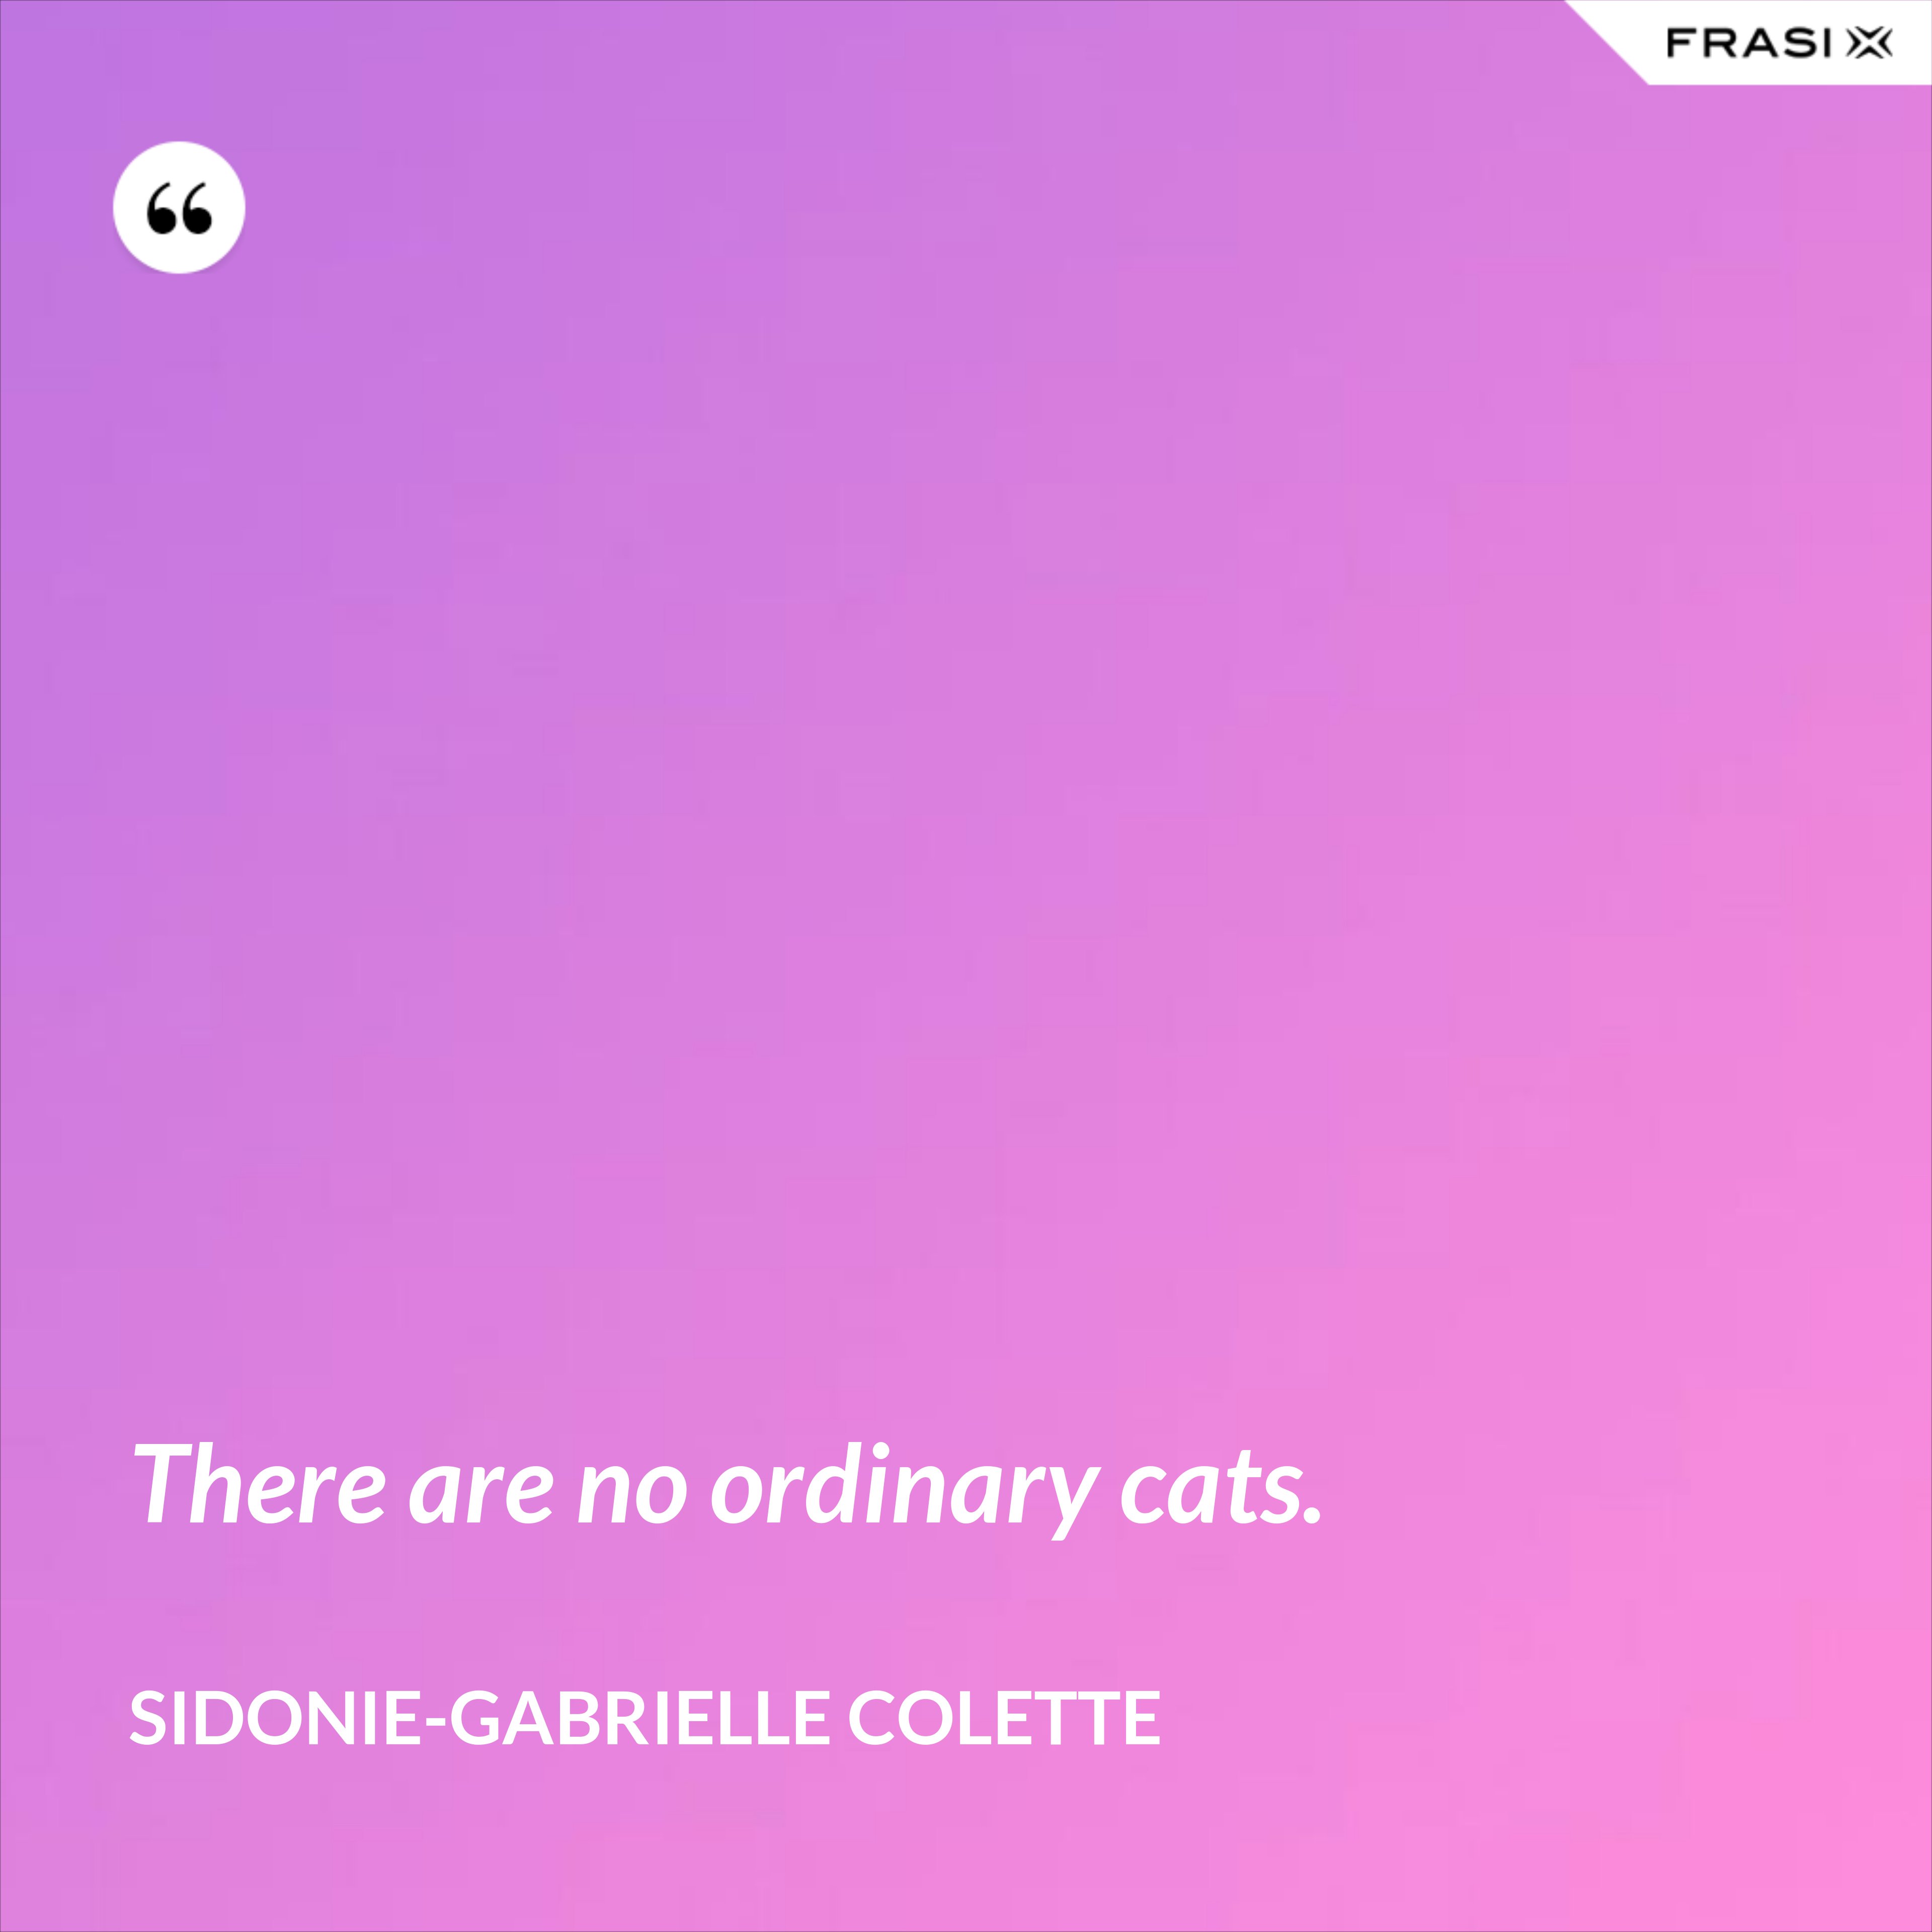 There are no ordinary cats. - Sidonie-Gabrielle Colette